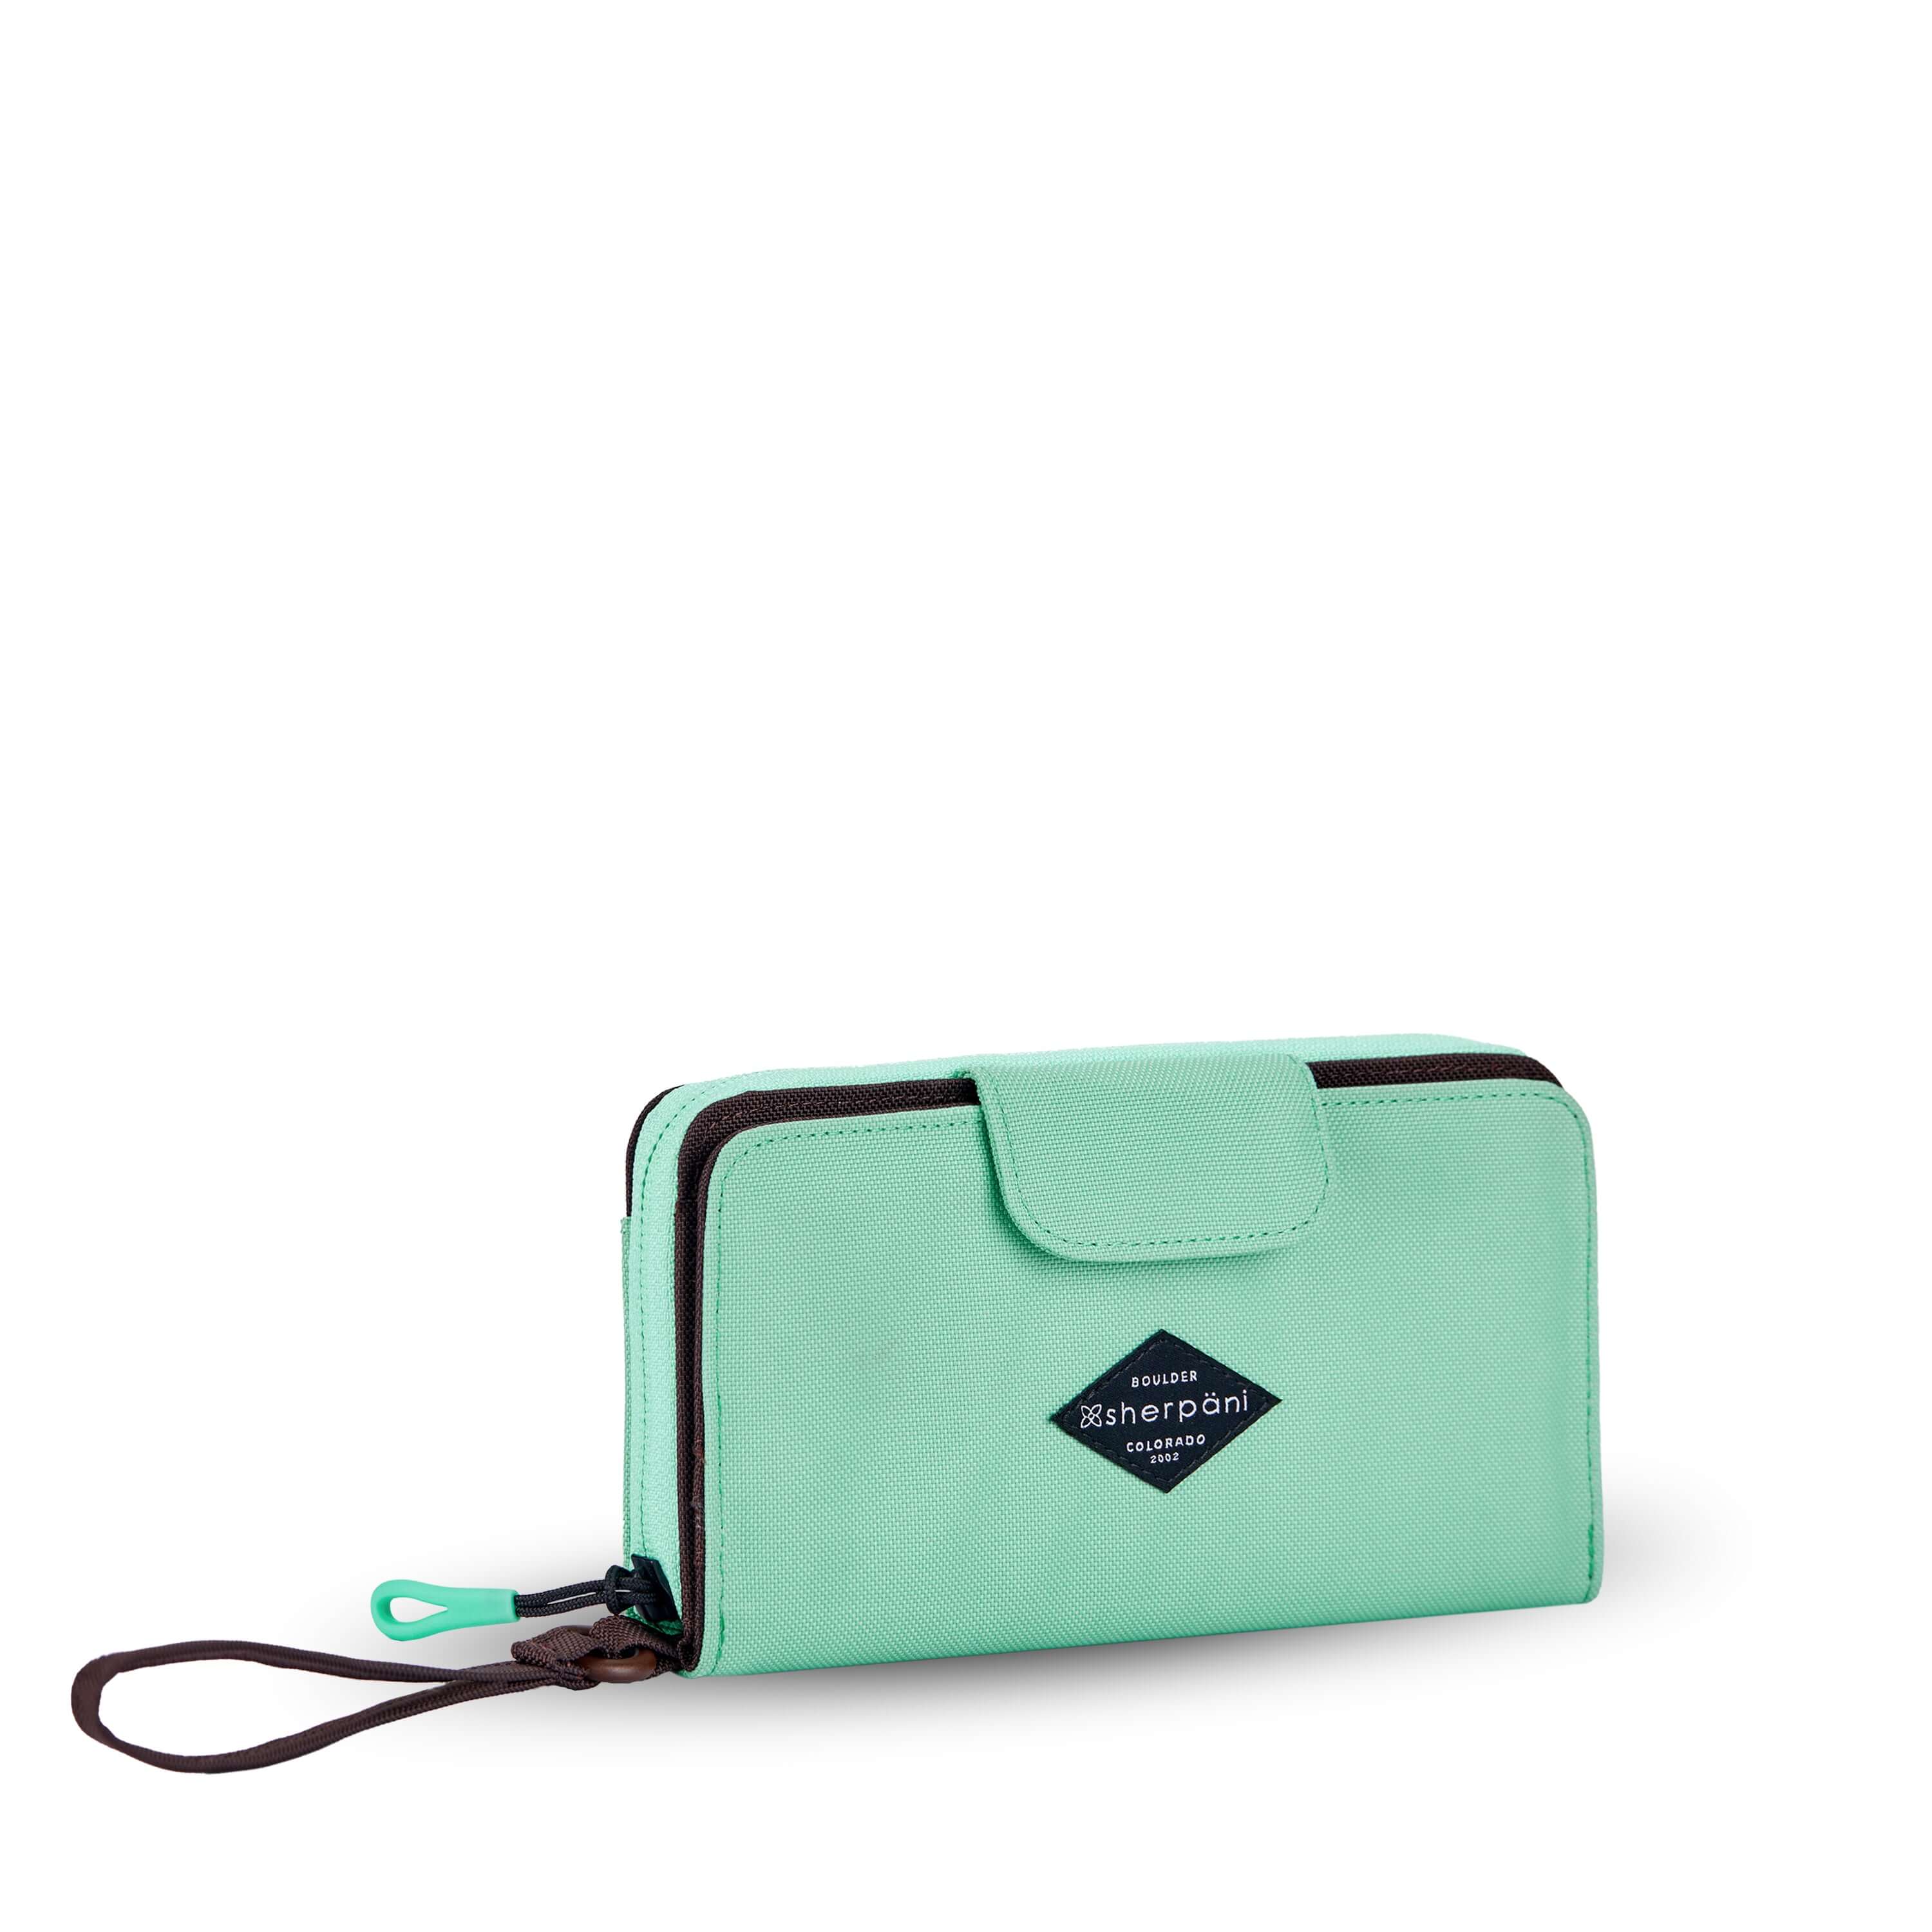 Angled front view of Sherpani wallet, the Tulum in Seagreen. The wallet is light green in color. There is a fabric flap with snap feature that folds over to open and close the wallet. There is a zipper compartment in the back with an easy-pull zipper accented in light green. The wallet features a wristlet strap in brown.